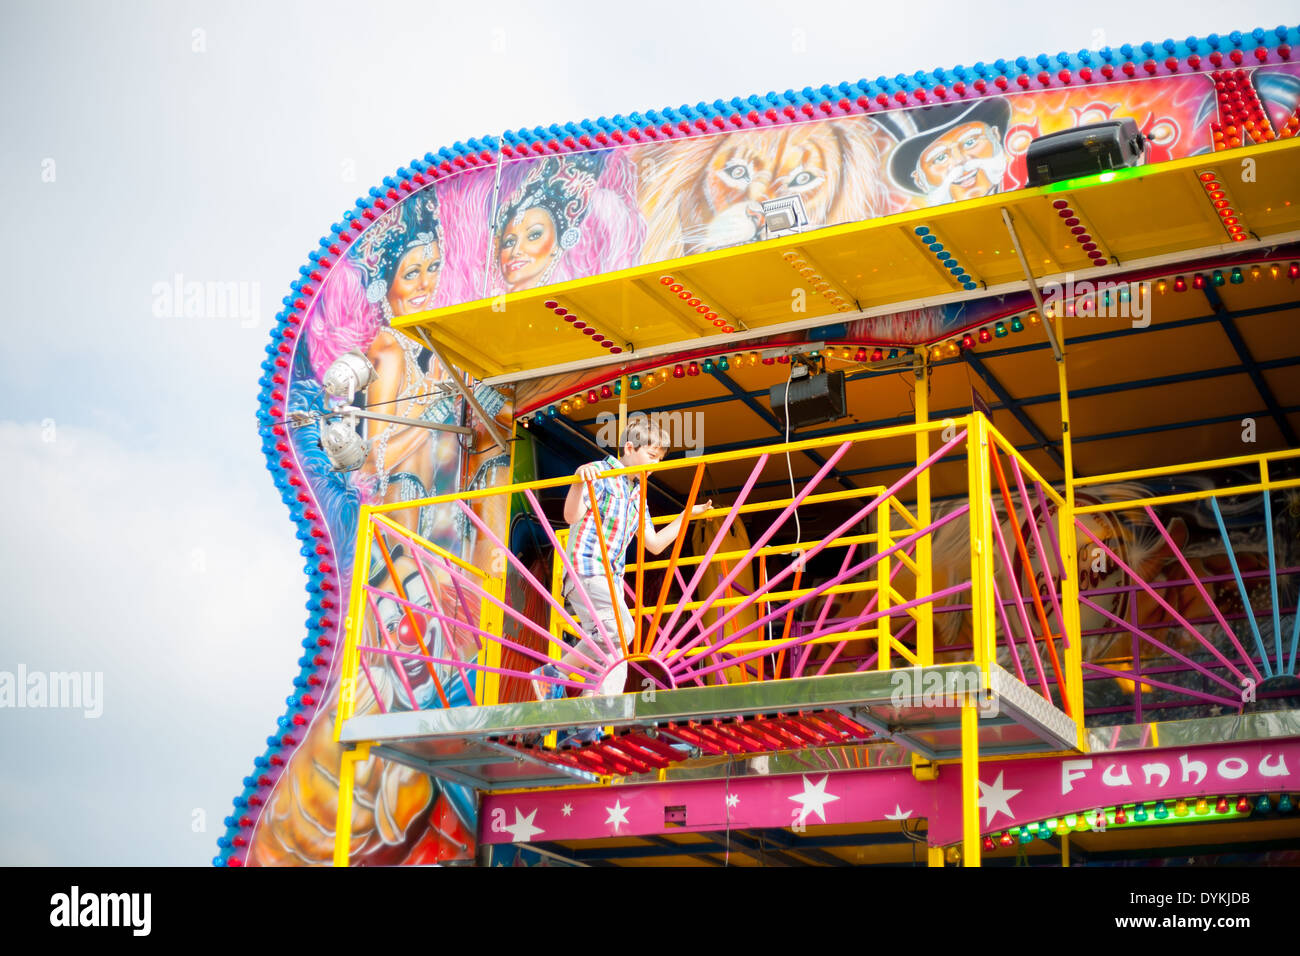 Child on colorful fair attraction having fun Stock Photo